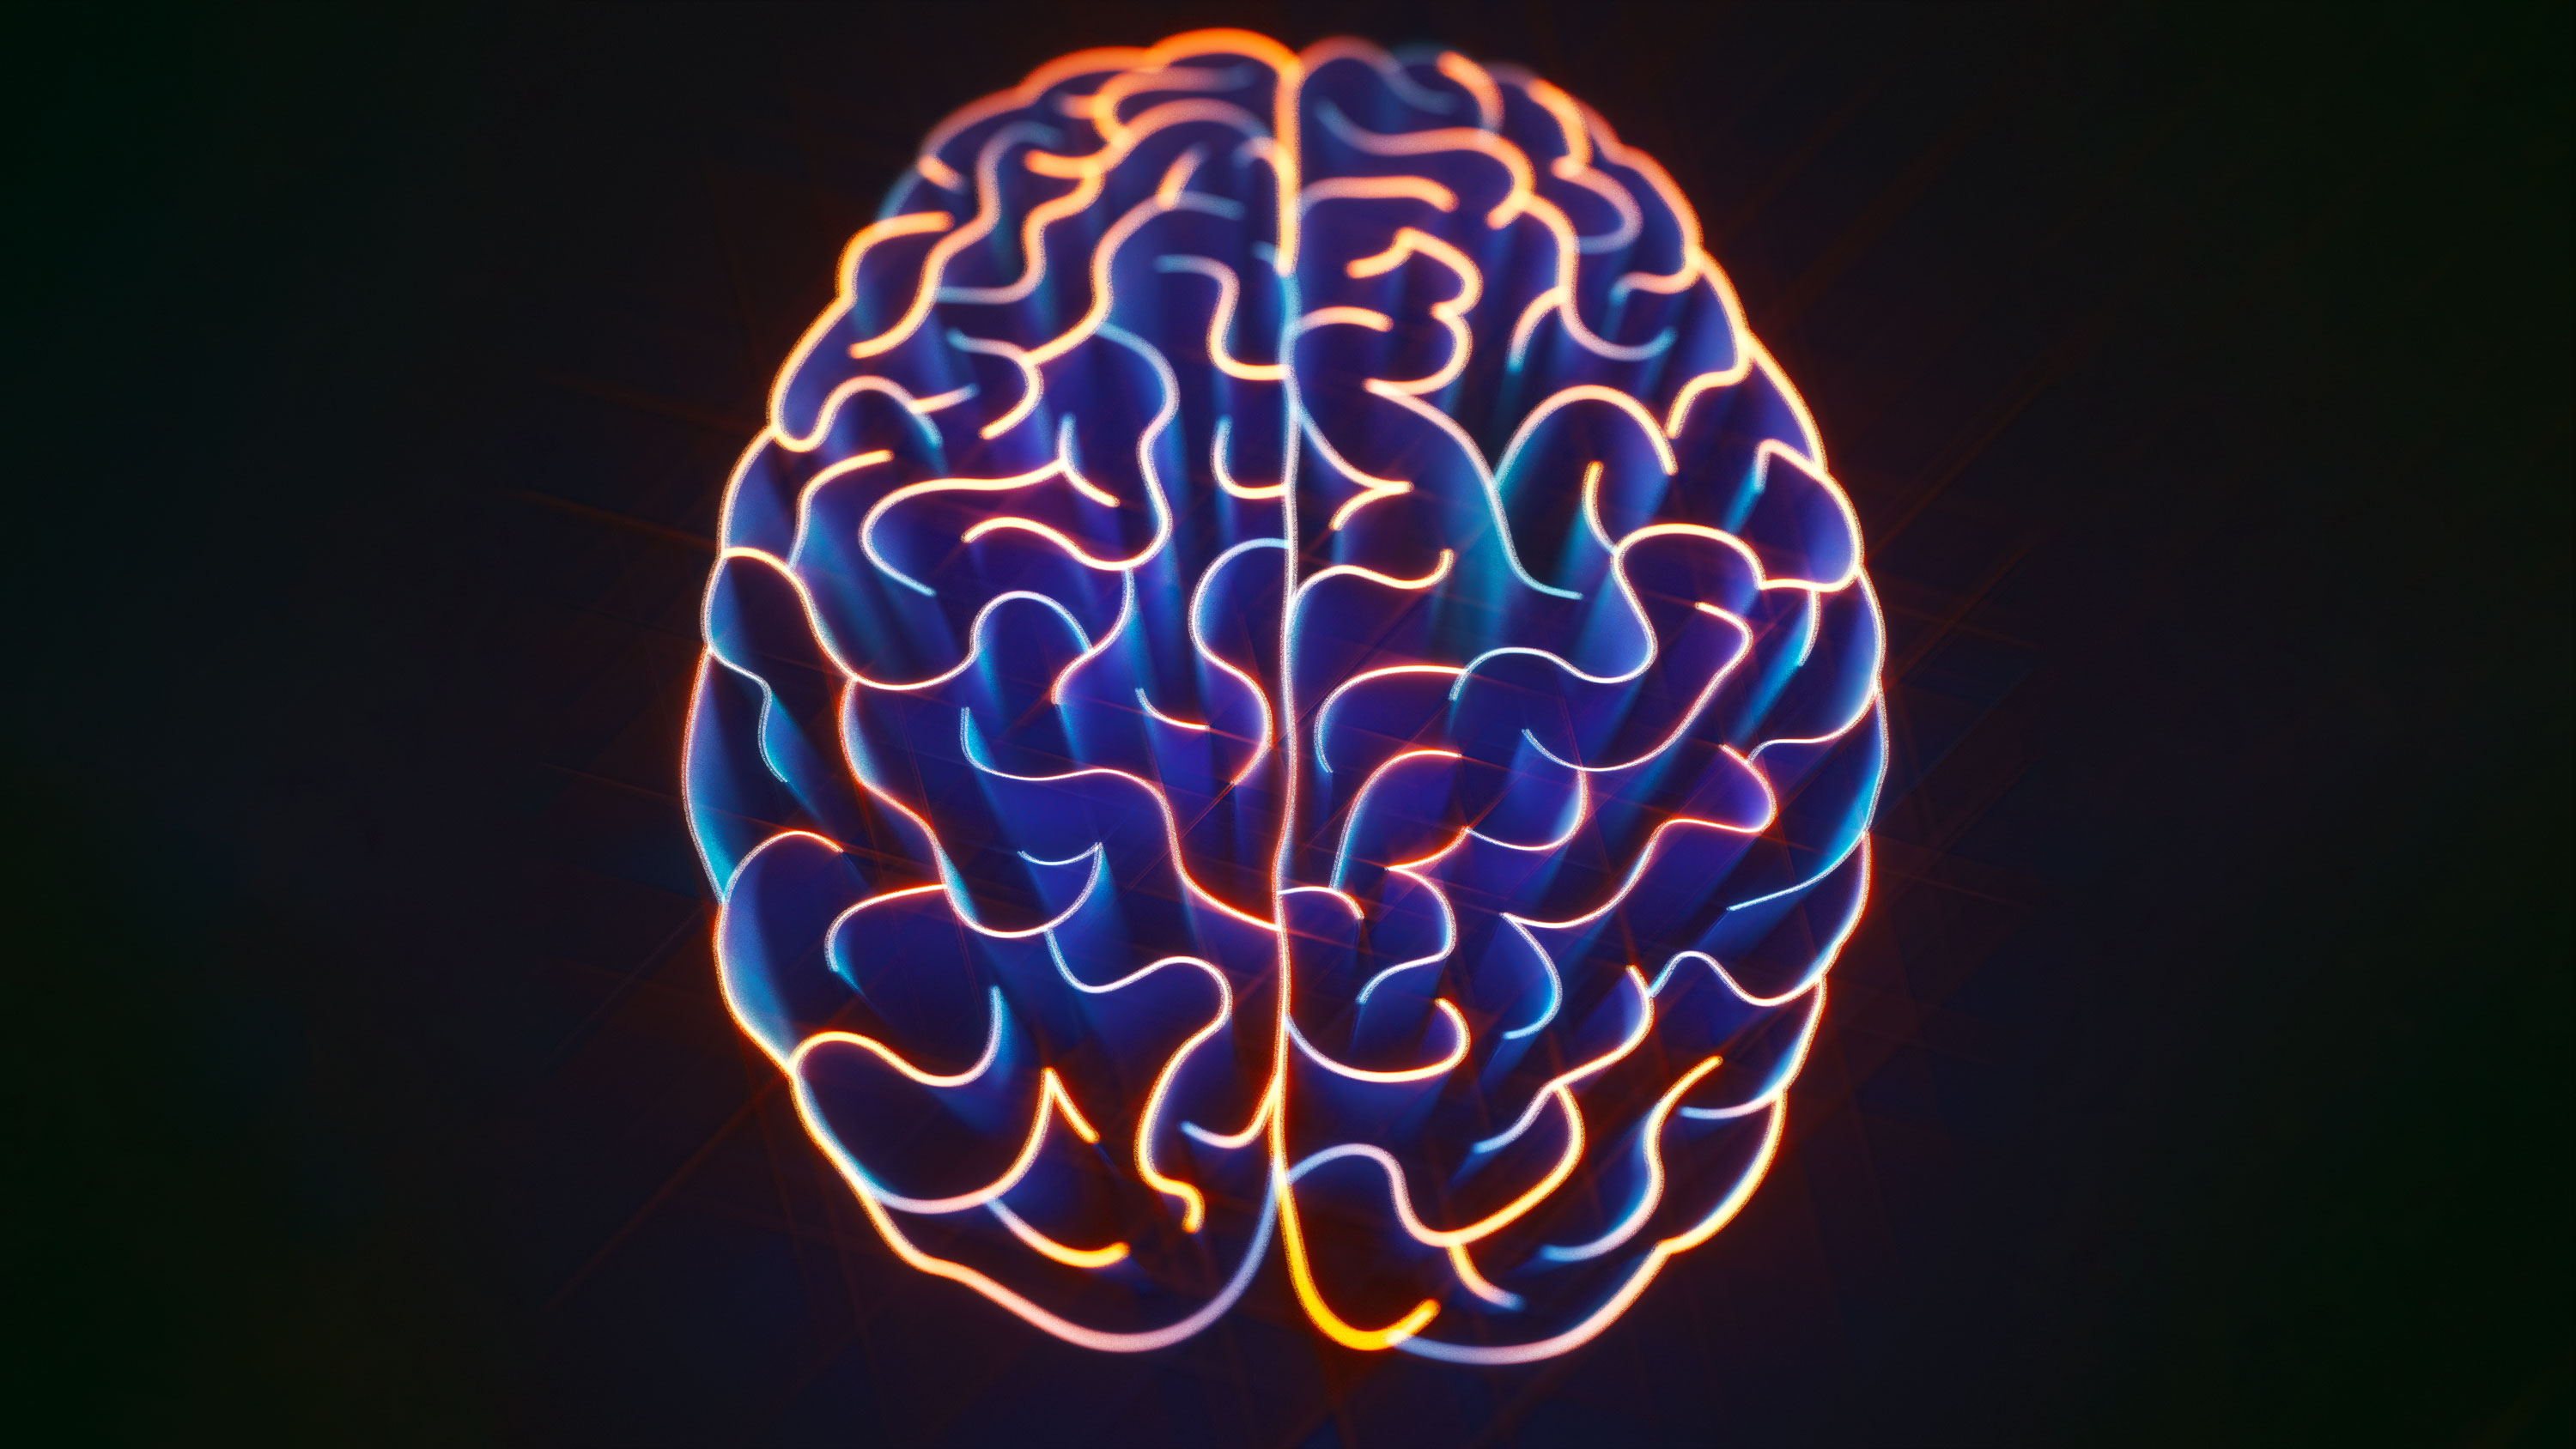 Glowing conceptual illustration of a brain